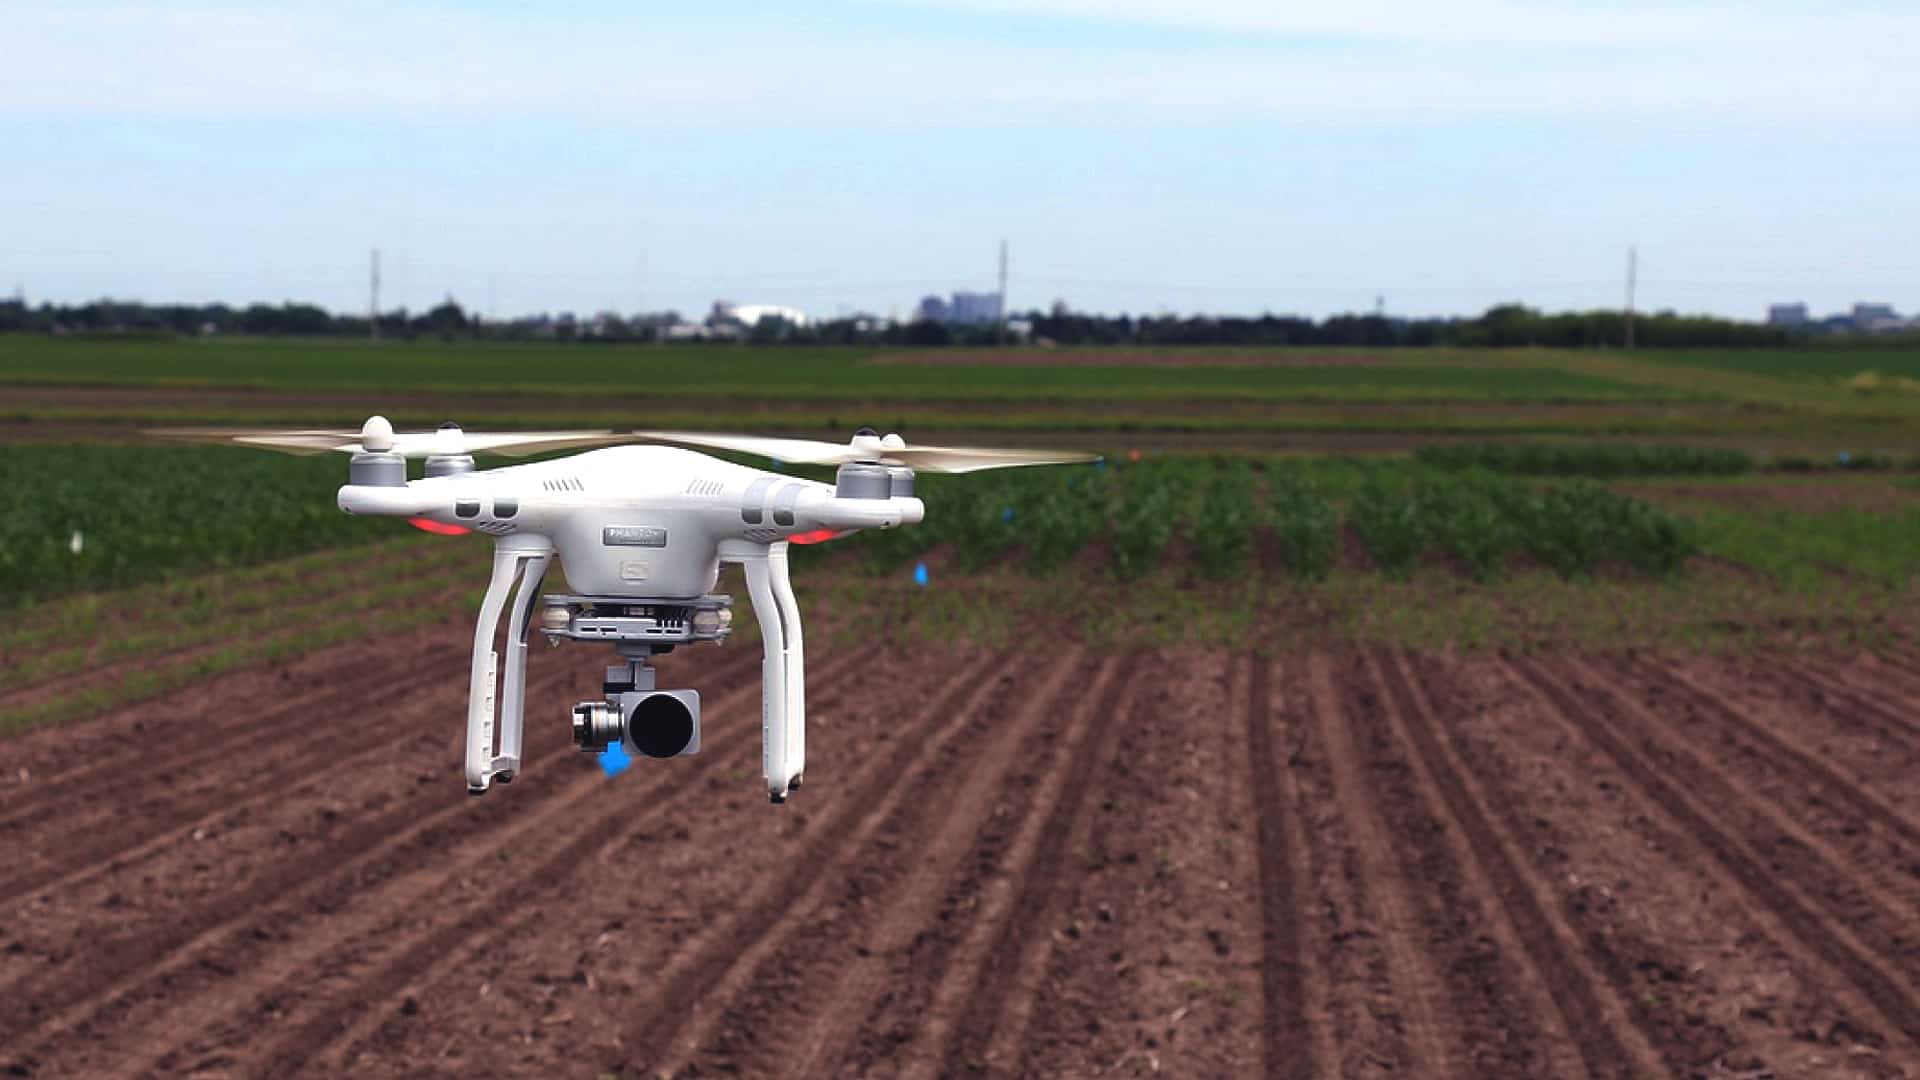 Crop insurance: Agri ministry seeks DGCA nod for taking drone-based crop images in 10